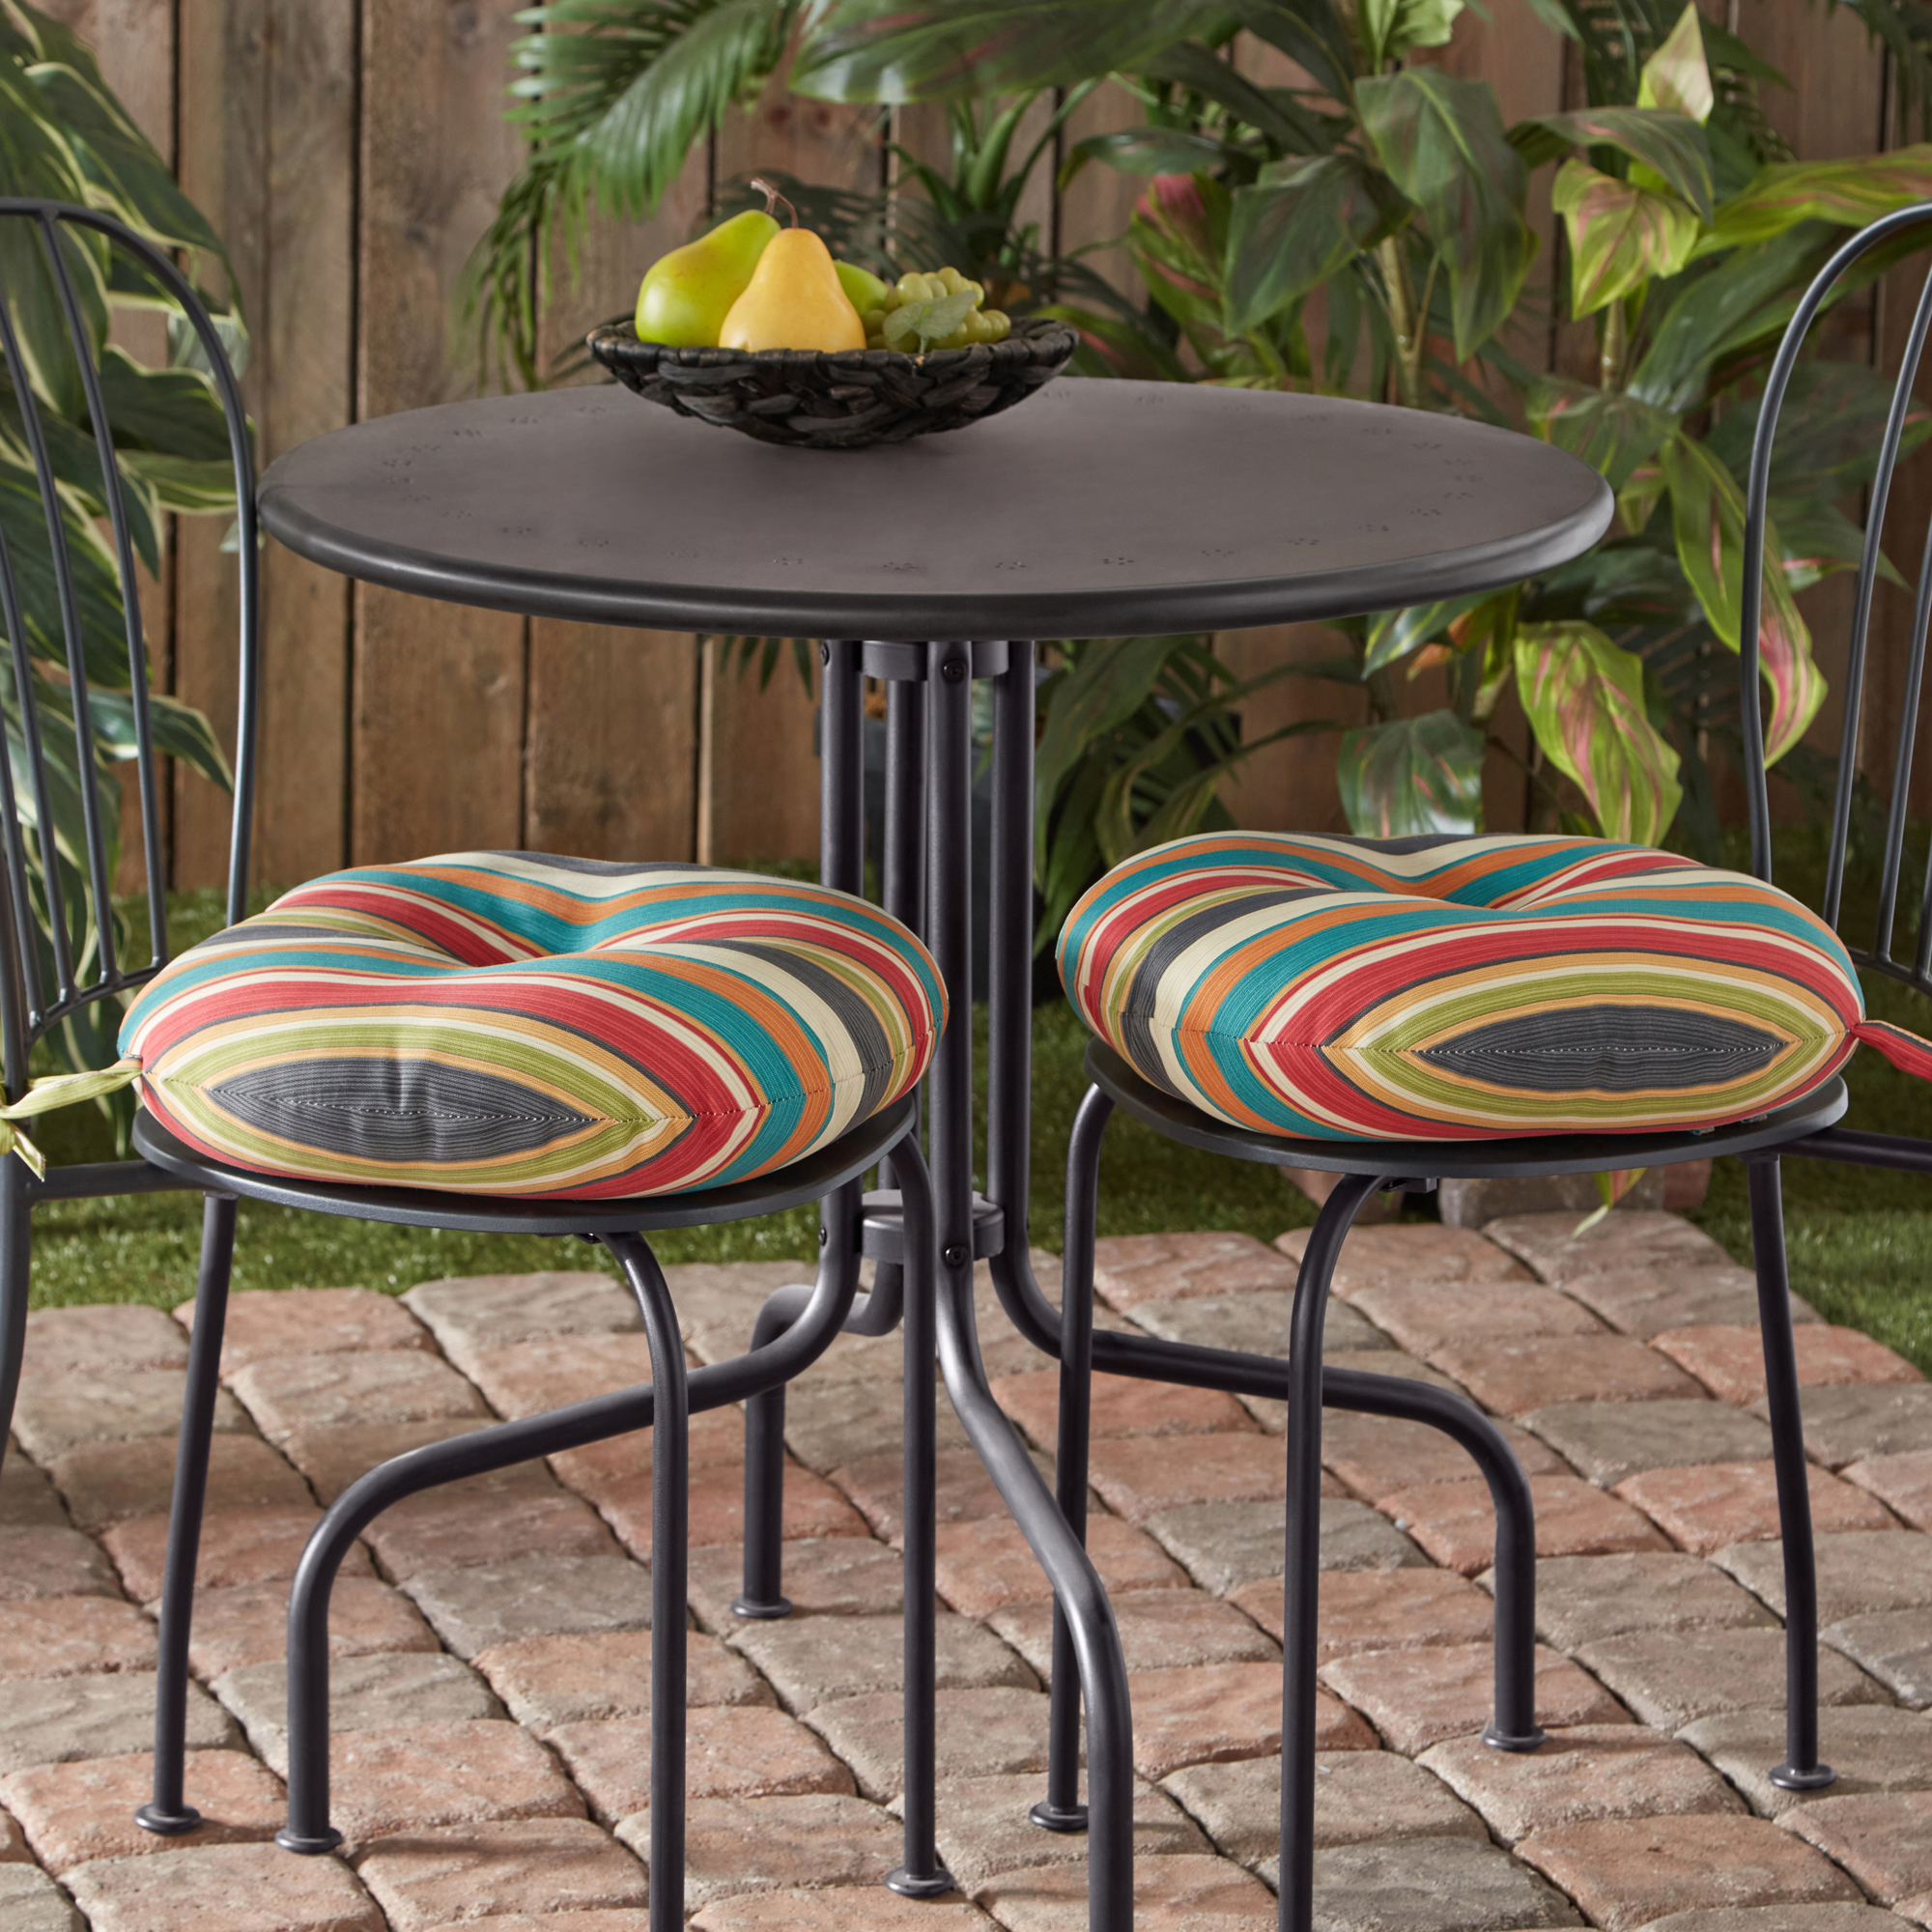 Greendale Home Fashions SunSet Stripe 15 in. Round Outdoor Reversible Bistro Seat Cushion (Set of 2) - image 3 of 6